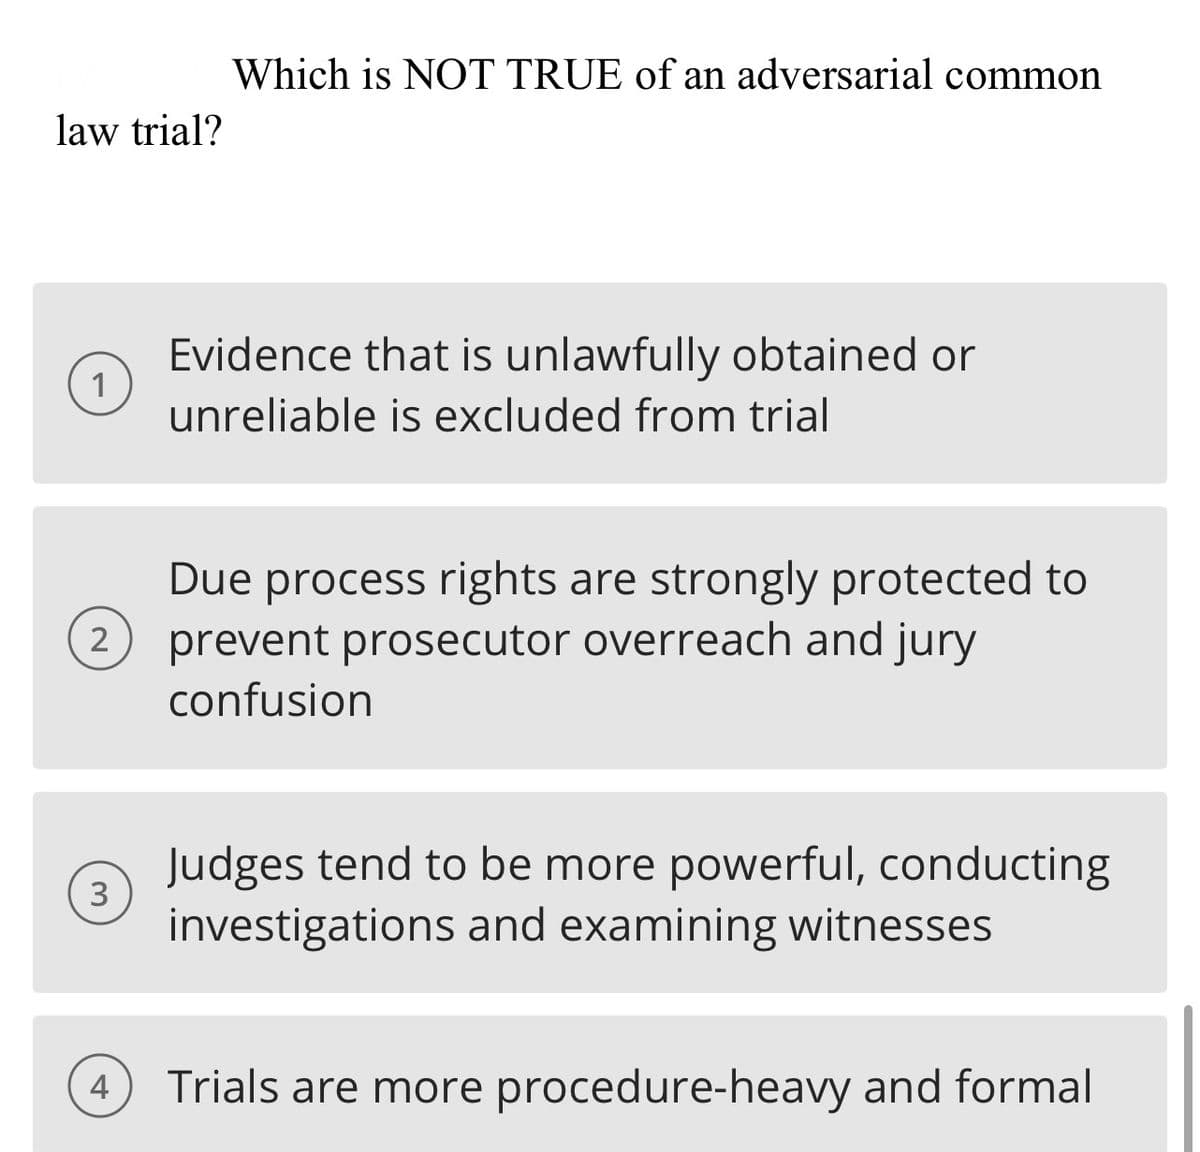 law trial?
1
2
3
4
Which is NOT TRUE of an adversarial common
Evidence that is unlawfully obtained or
unreliable is excluded from trial
Due process rights are strongly protected to
prevent prosecutor overreach and jury
confusion
Judges tend to be more powerful, conducting
investigations and examining witnesses
Trials are more procedure-heavy and formal